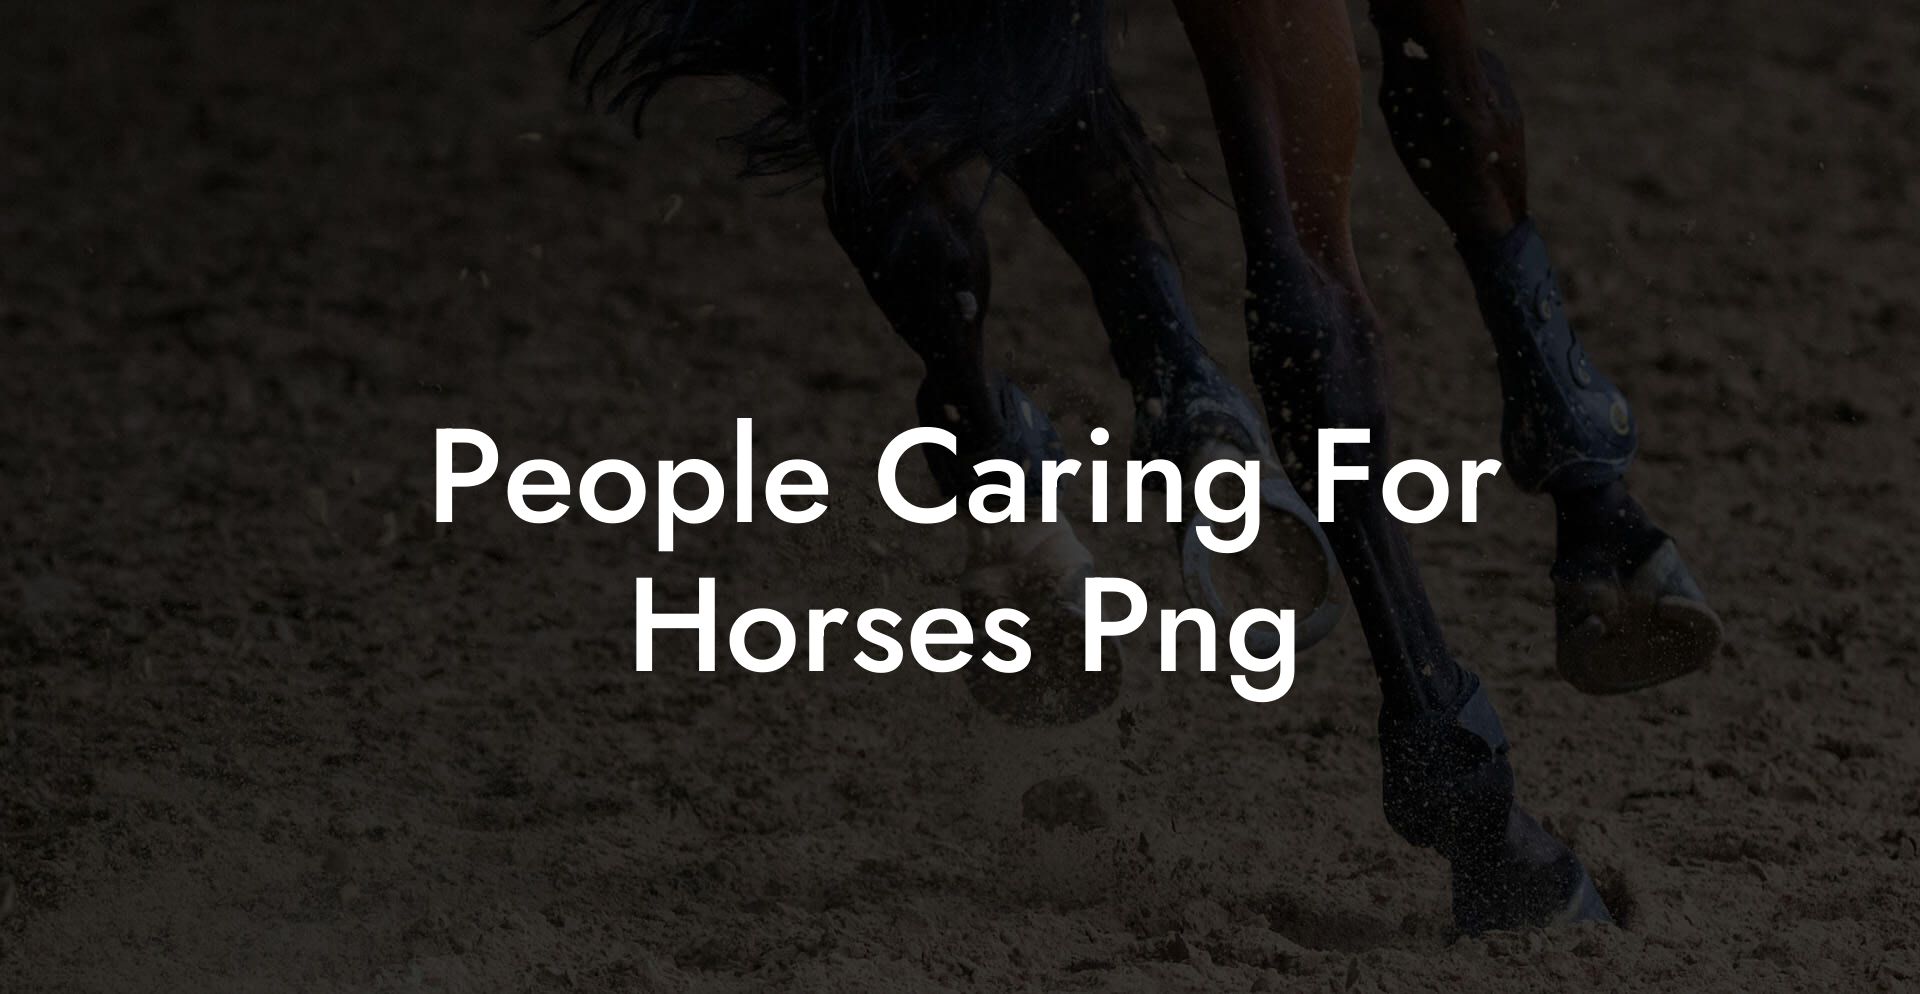 People Caring For Horses Png